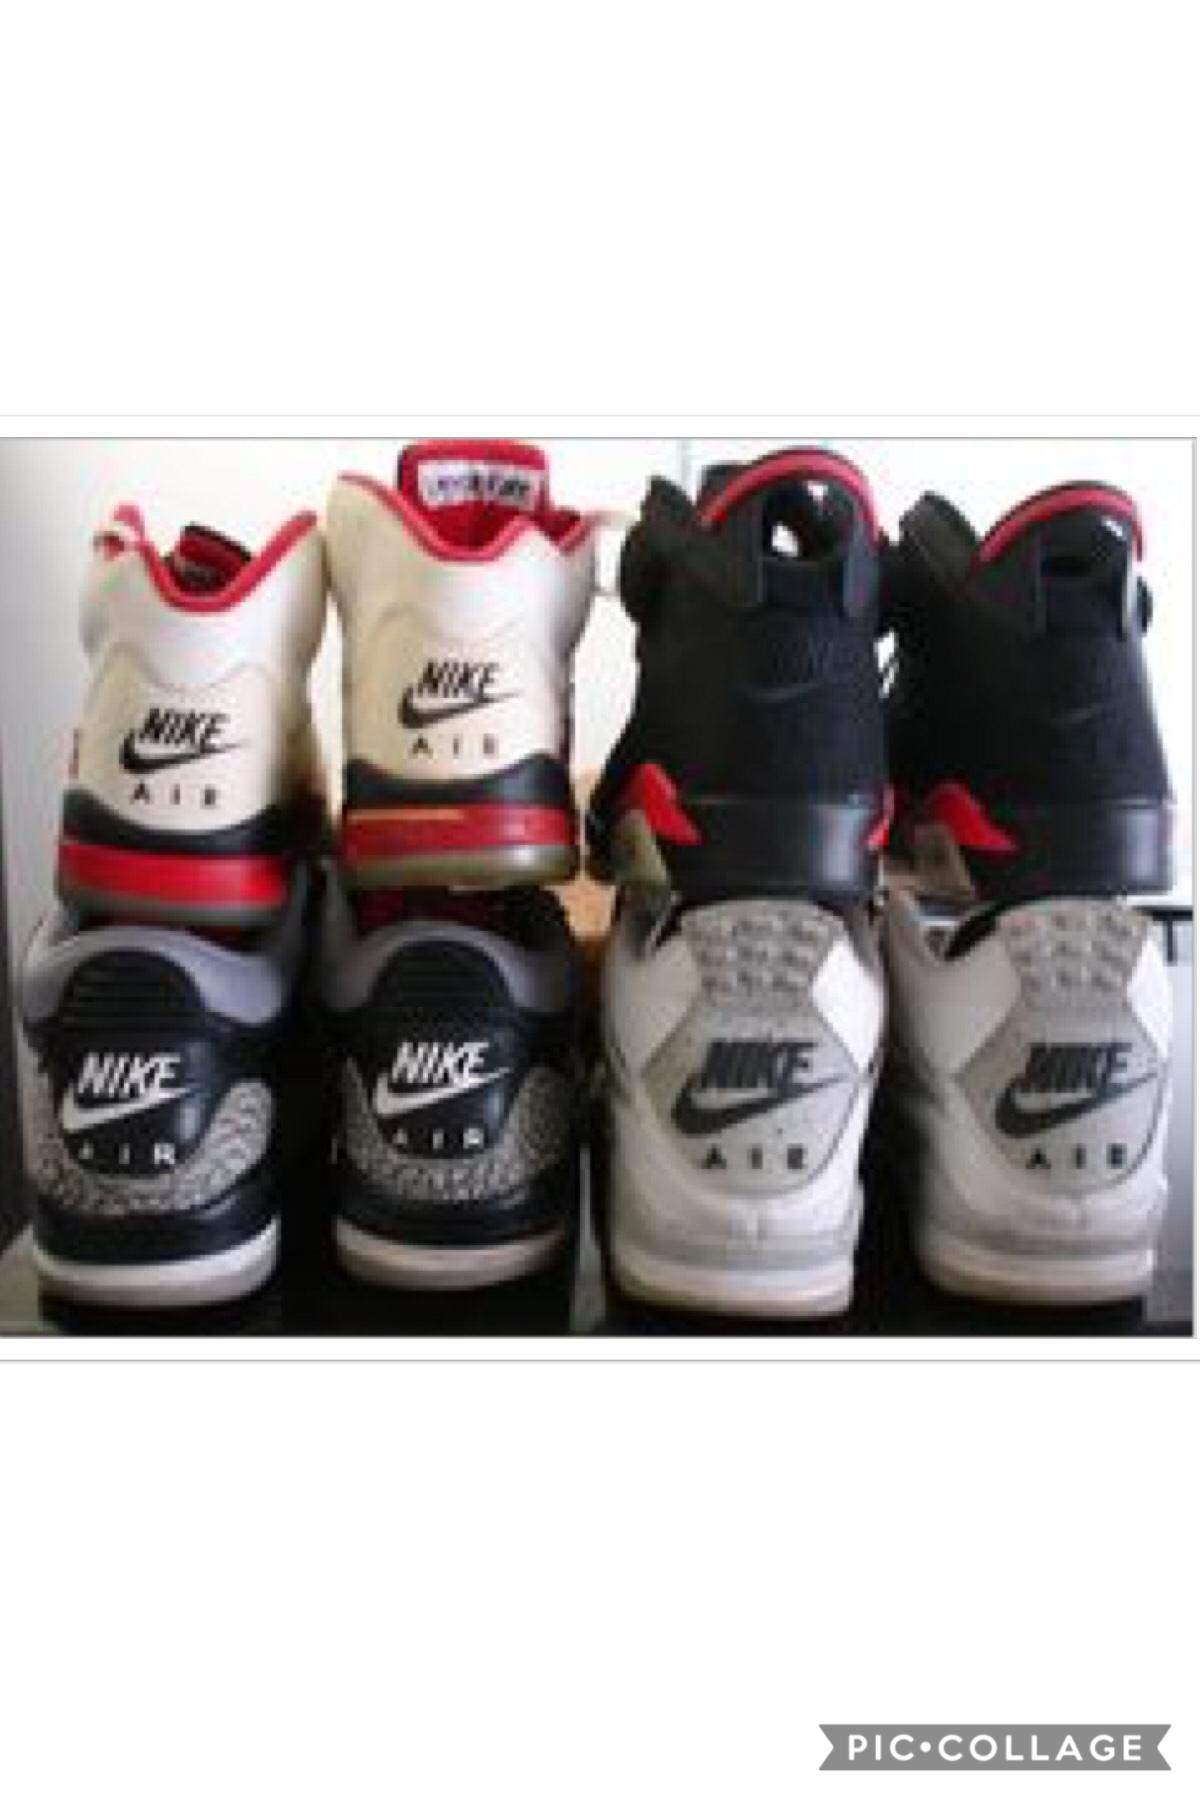 My shoe collection 